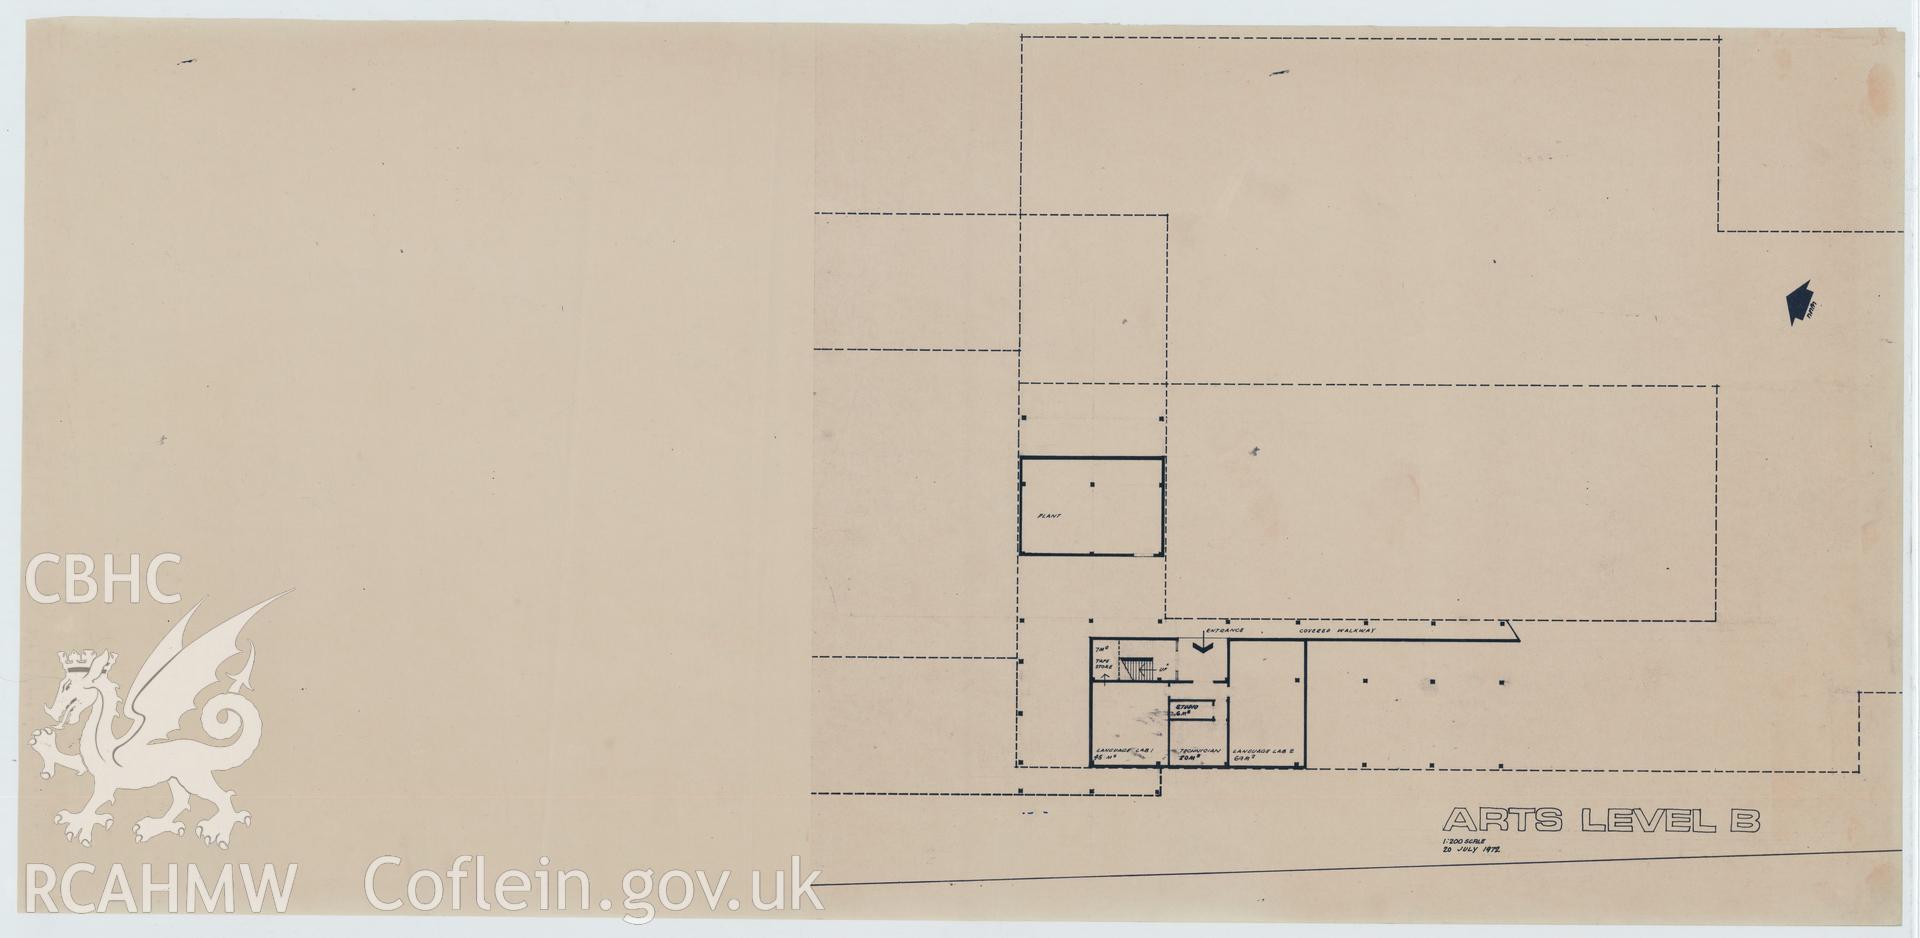 Digital copy of a plan showing Arts Level B of the proposed Library Arts Complex at University College Aberystwyth, produced by Percy Thomas Partnership. Scale 1:200.